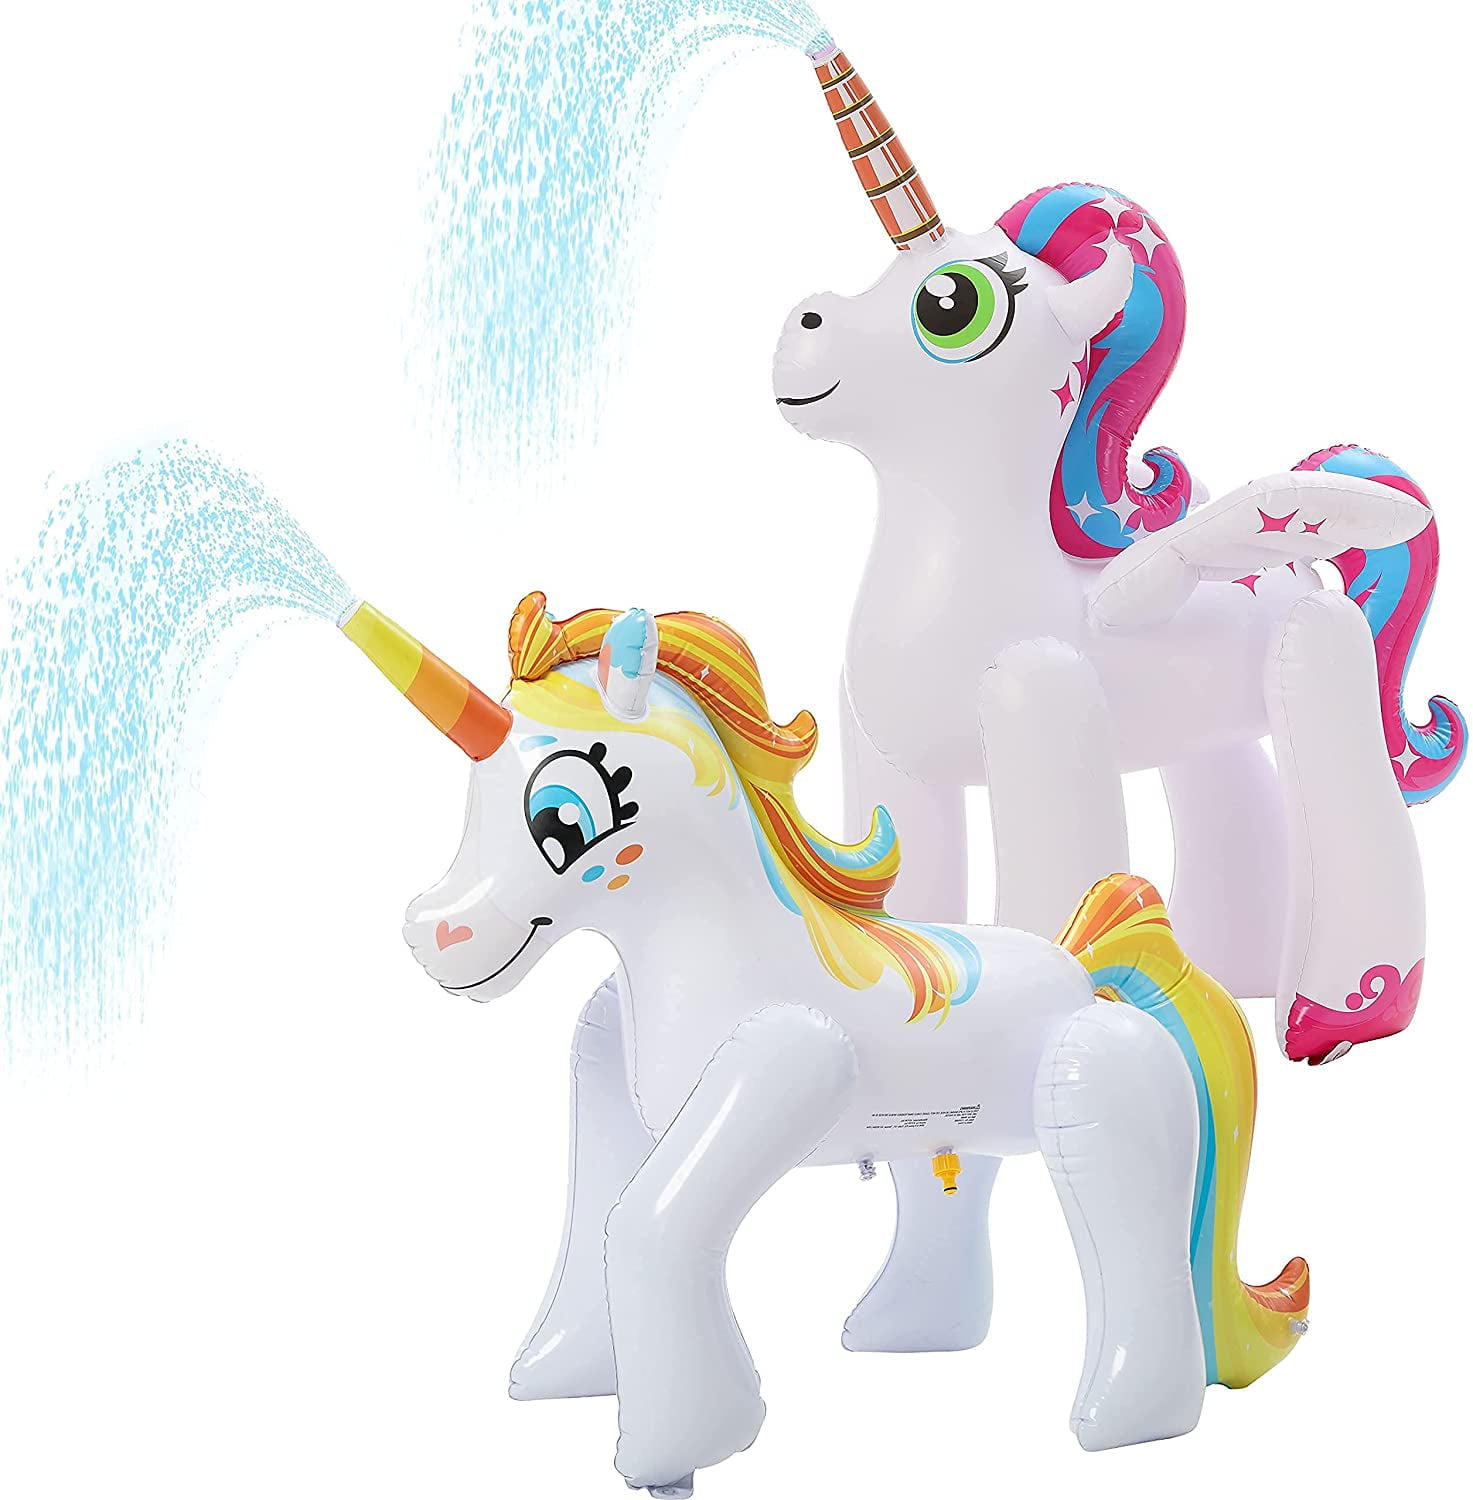 Inflatable Unicorn Yard Sprinkler Rainbow Sprinkler for Kids with Wings, Water Toy Summer Outdoor Fun, Lawn Sprinkler Toy for Kids Toddlers 2 Pack